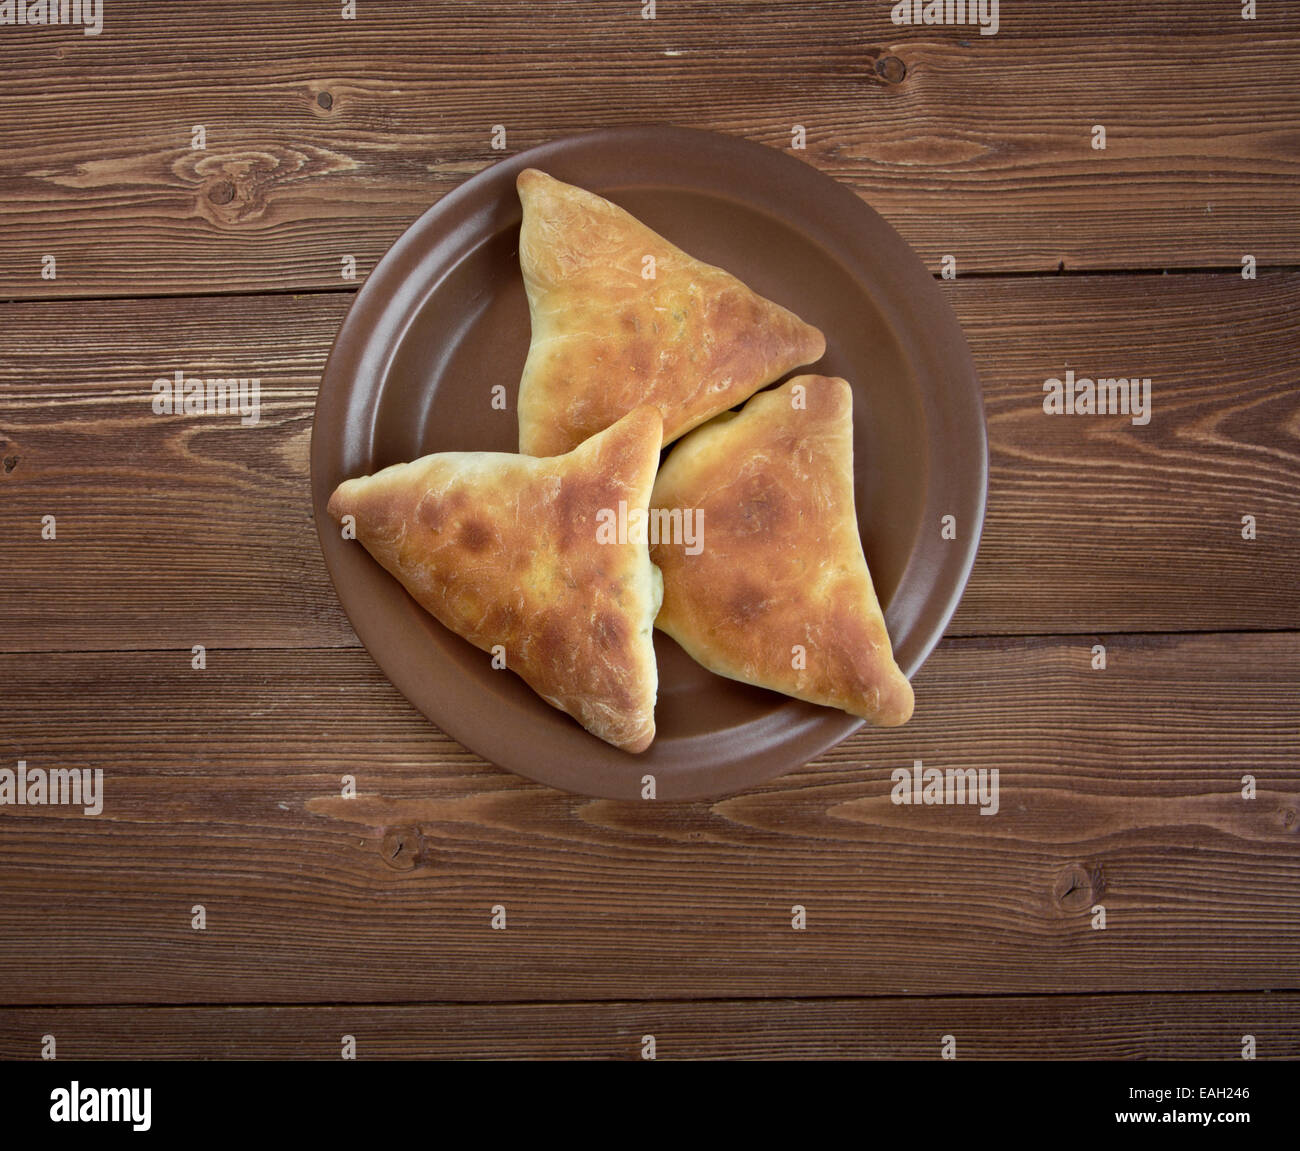 Samosa - Baked stuffed pastry.local cuisines of South Asia, Southeast Asia, Central Asia and Southwest Asia, the Arabian Peninsu Stock Photo